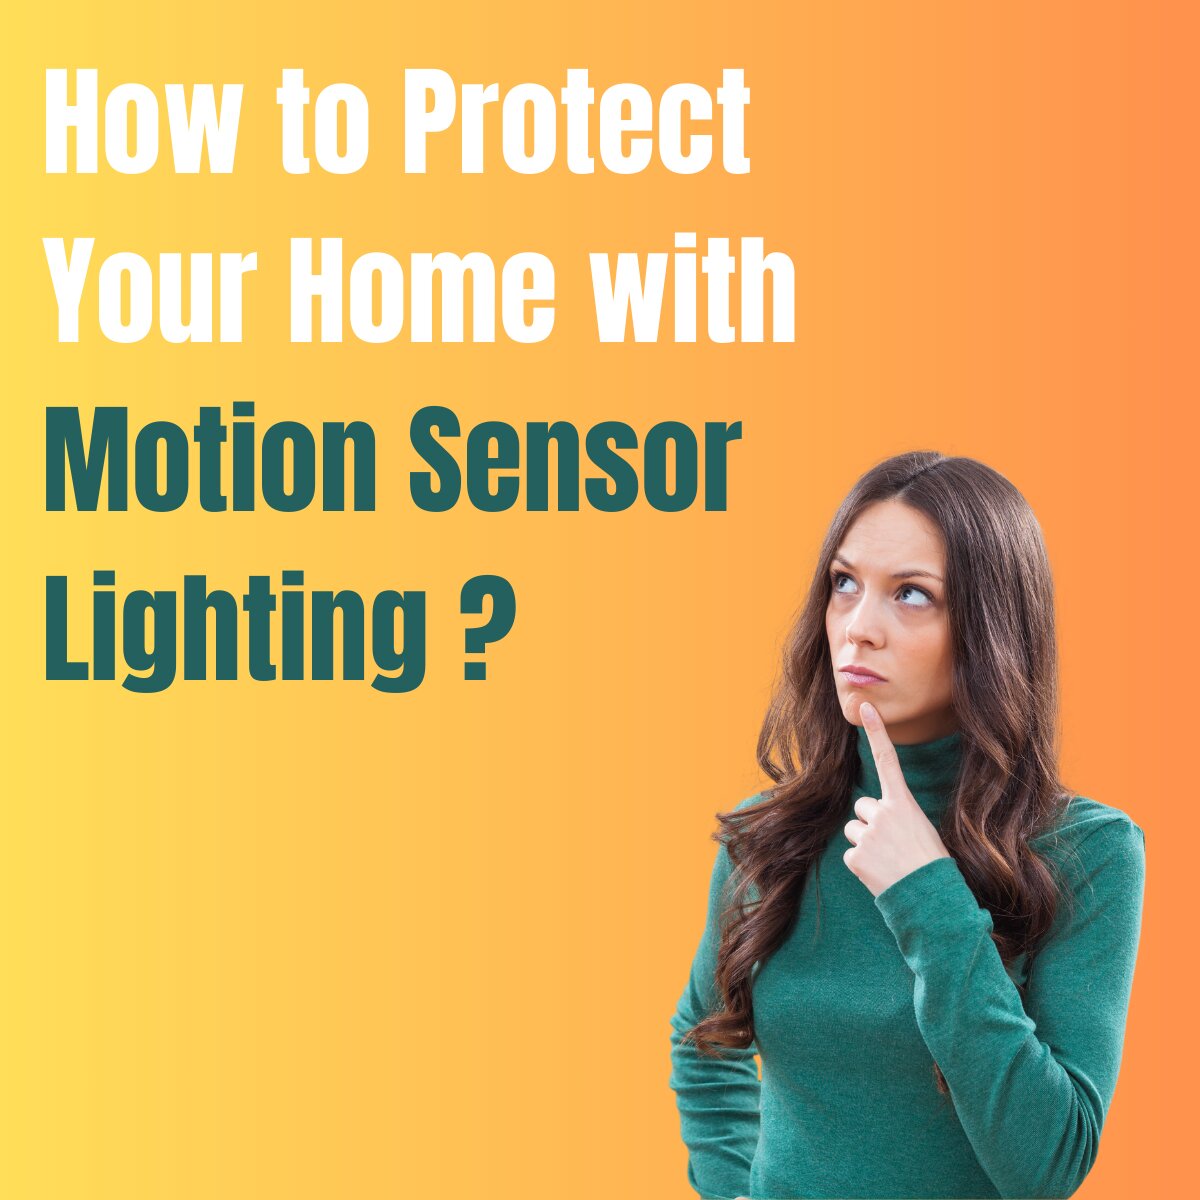 How to Protect Your Home with Motion Sensor Lighting